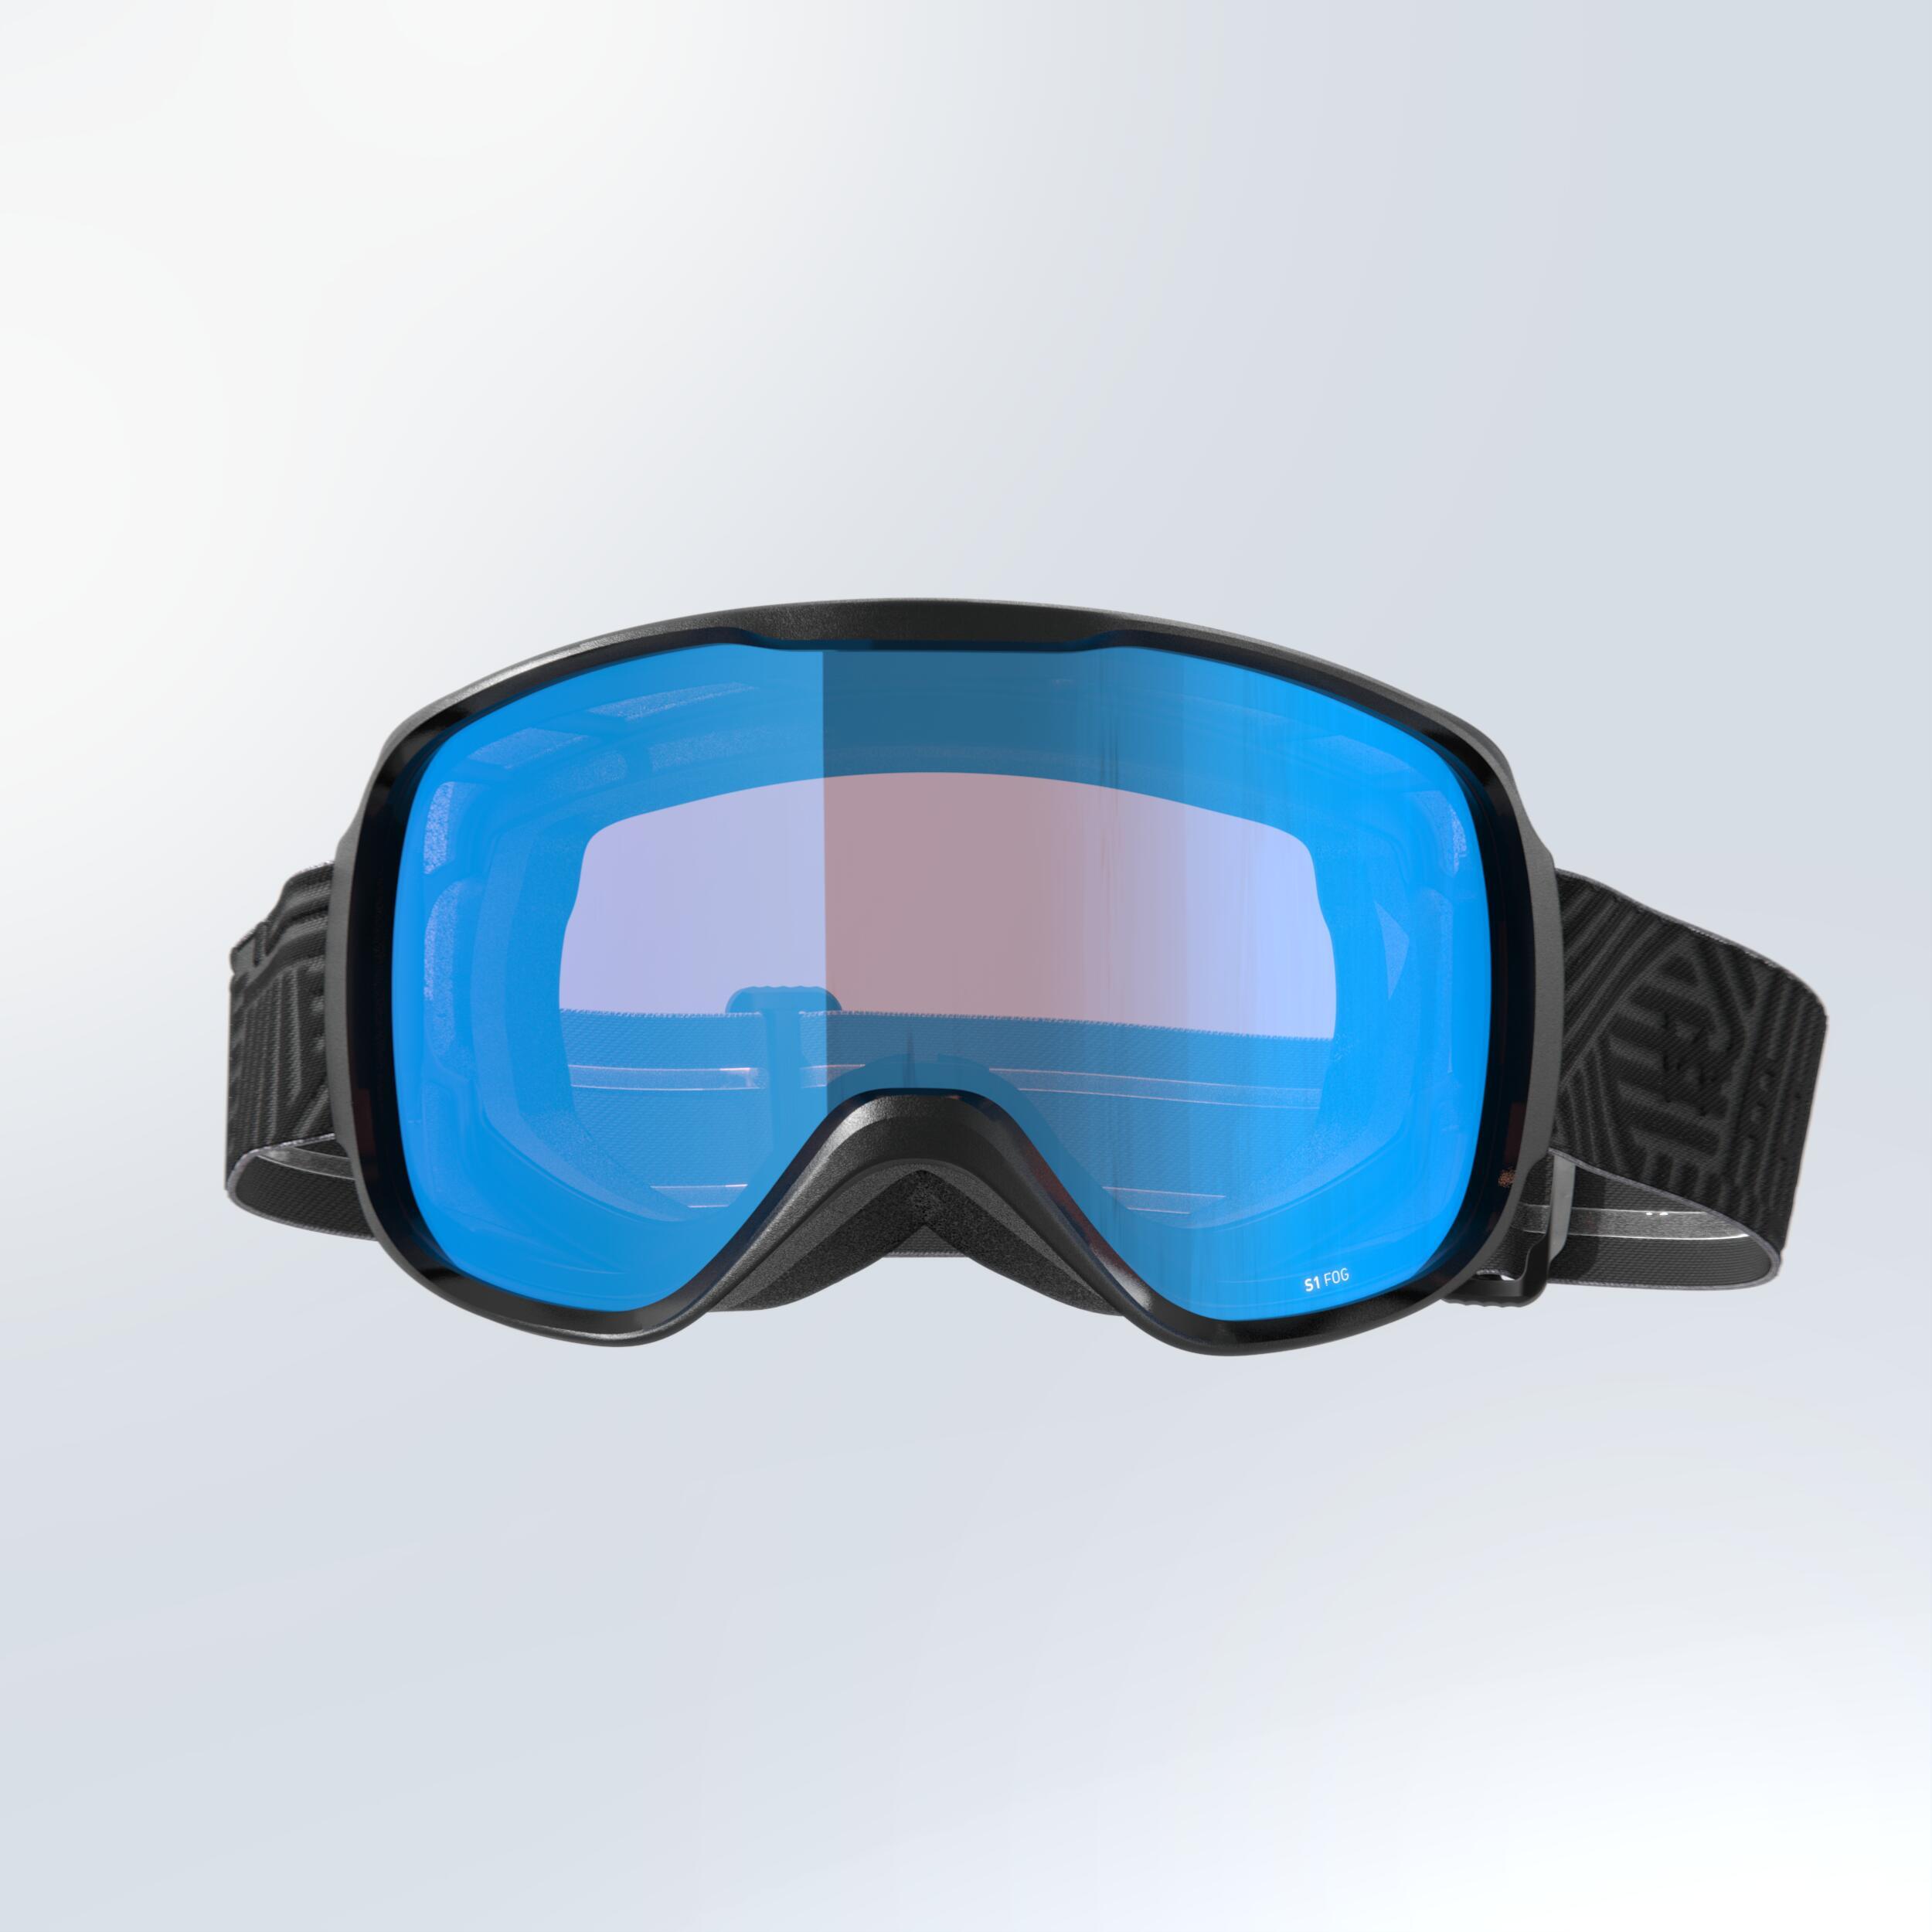 KIDS’ AND ADULT SKIING AND SNOWBOARDING GOGGLES BAD WEATHER - G 500 S1 - BLACK 2/4